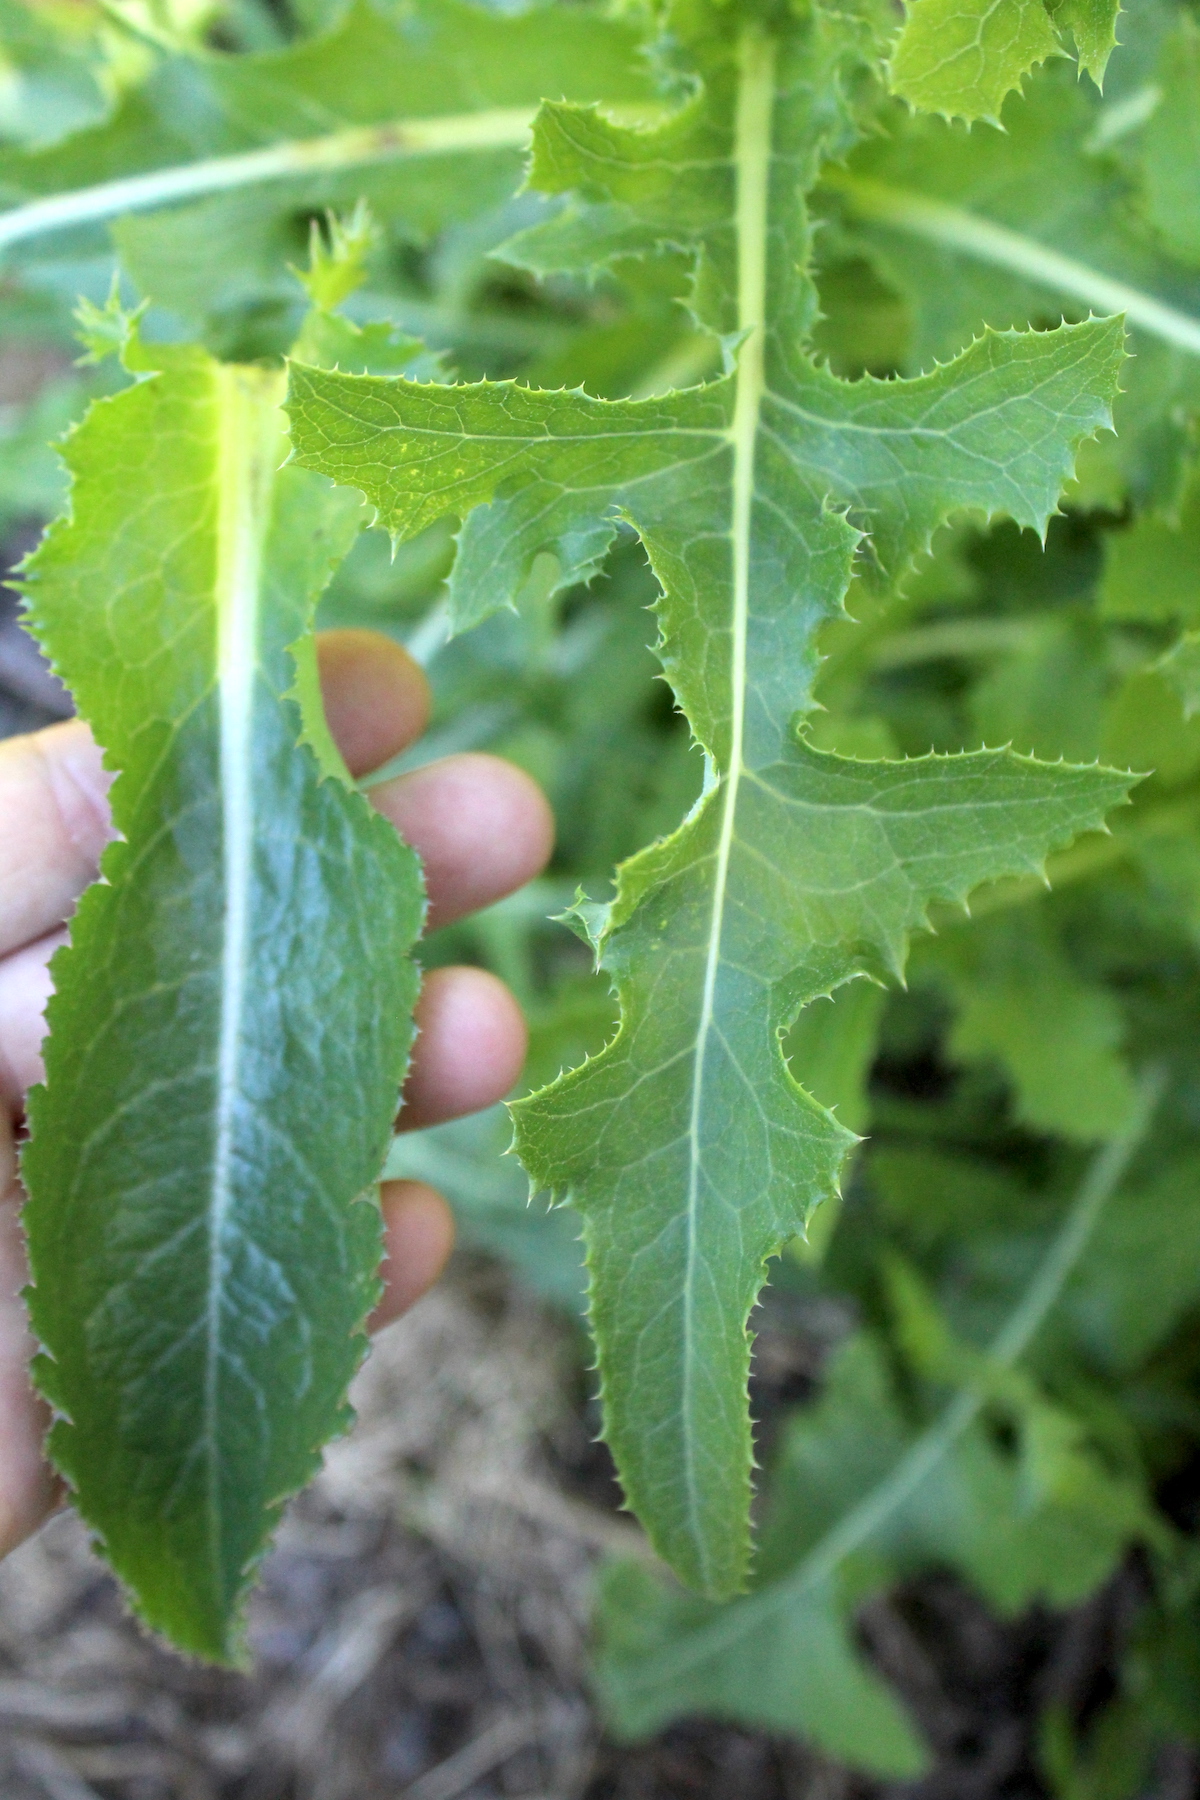 Using Wild Lettuce for Natural Pain Relief